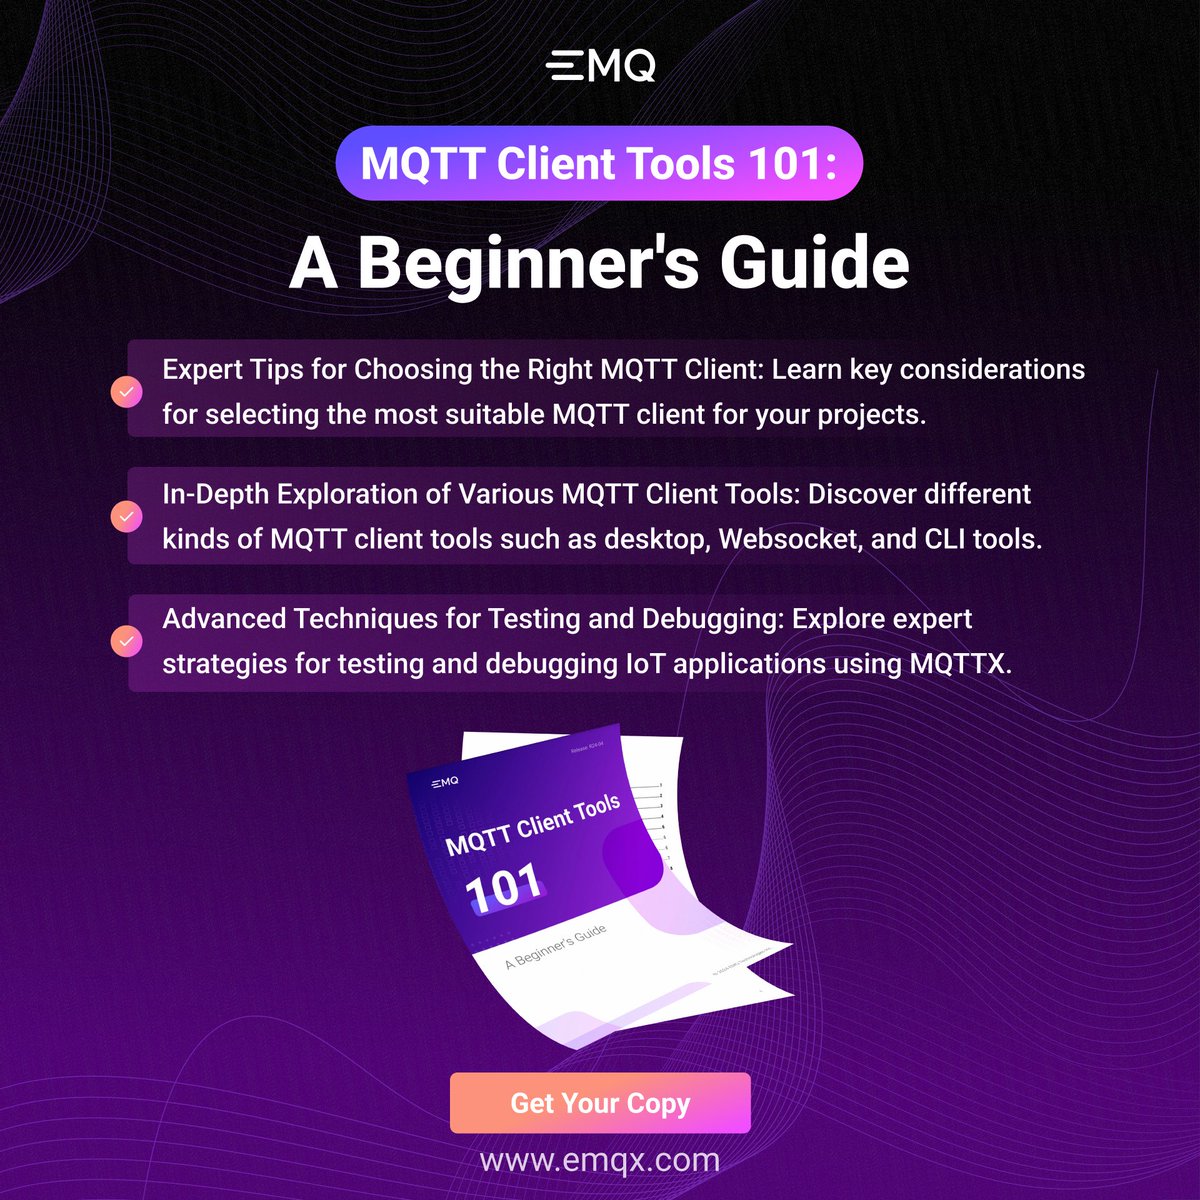 📘 Welcome to our 'MQTT Client Tools 101: A Beginner's Guide' eBook! 🚀 Unlock expert strategies for project advancement and master testing and debugging with MQTTX. 🛠️ #IoT #MQTT #Learn #FreeEbook #Strategies

Get your free copy now! ⏬
 social.emqx.com/u/4NlfQs